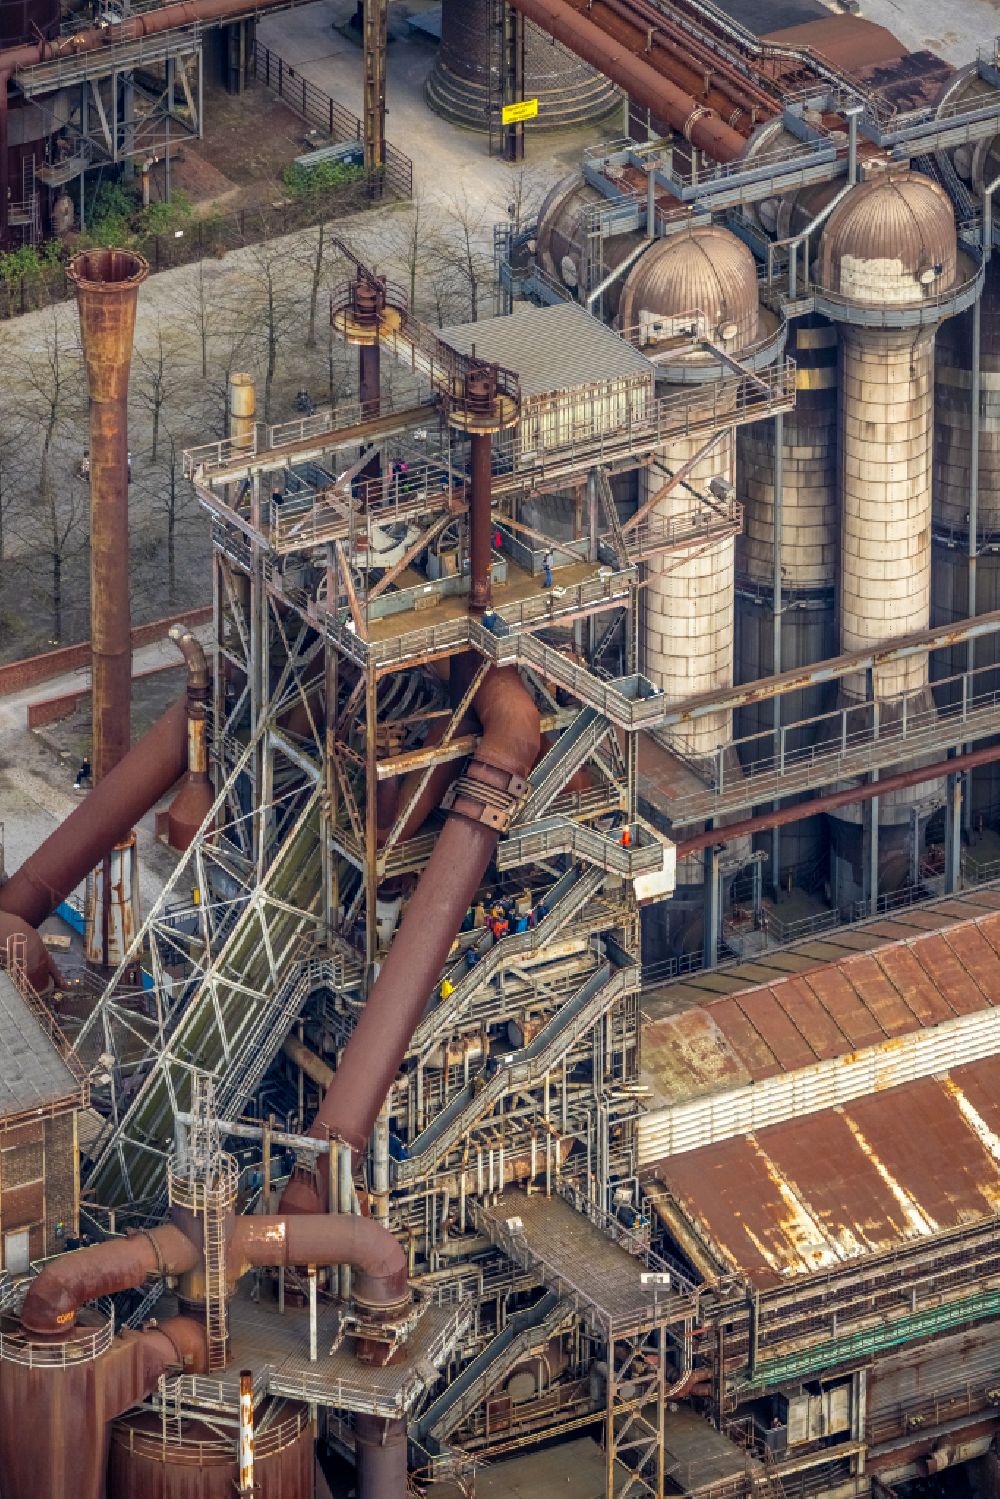 Aerial photograph Duisburg - Technical equipment and production facilities of the steelworks Meiderich in Duisburg in the state North Rhine-Westphalia